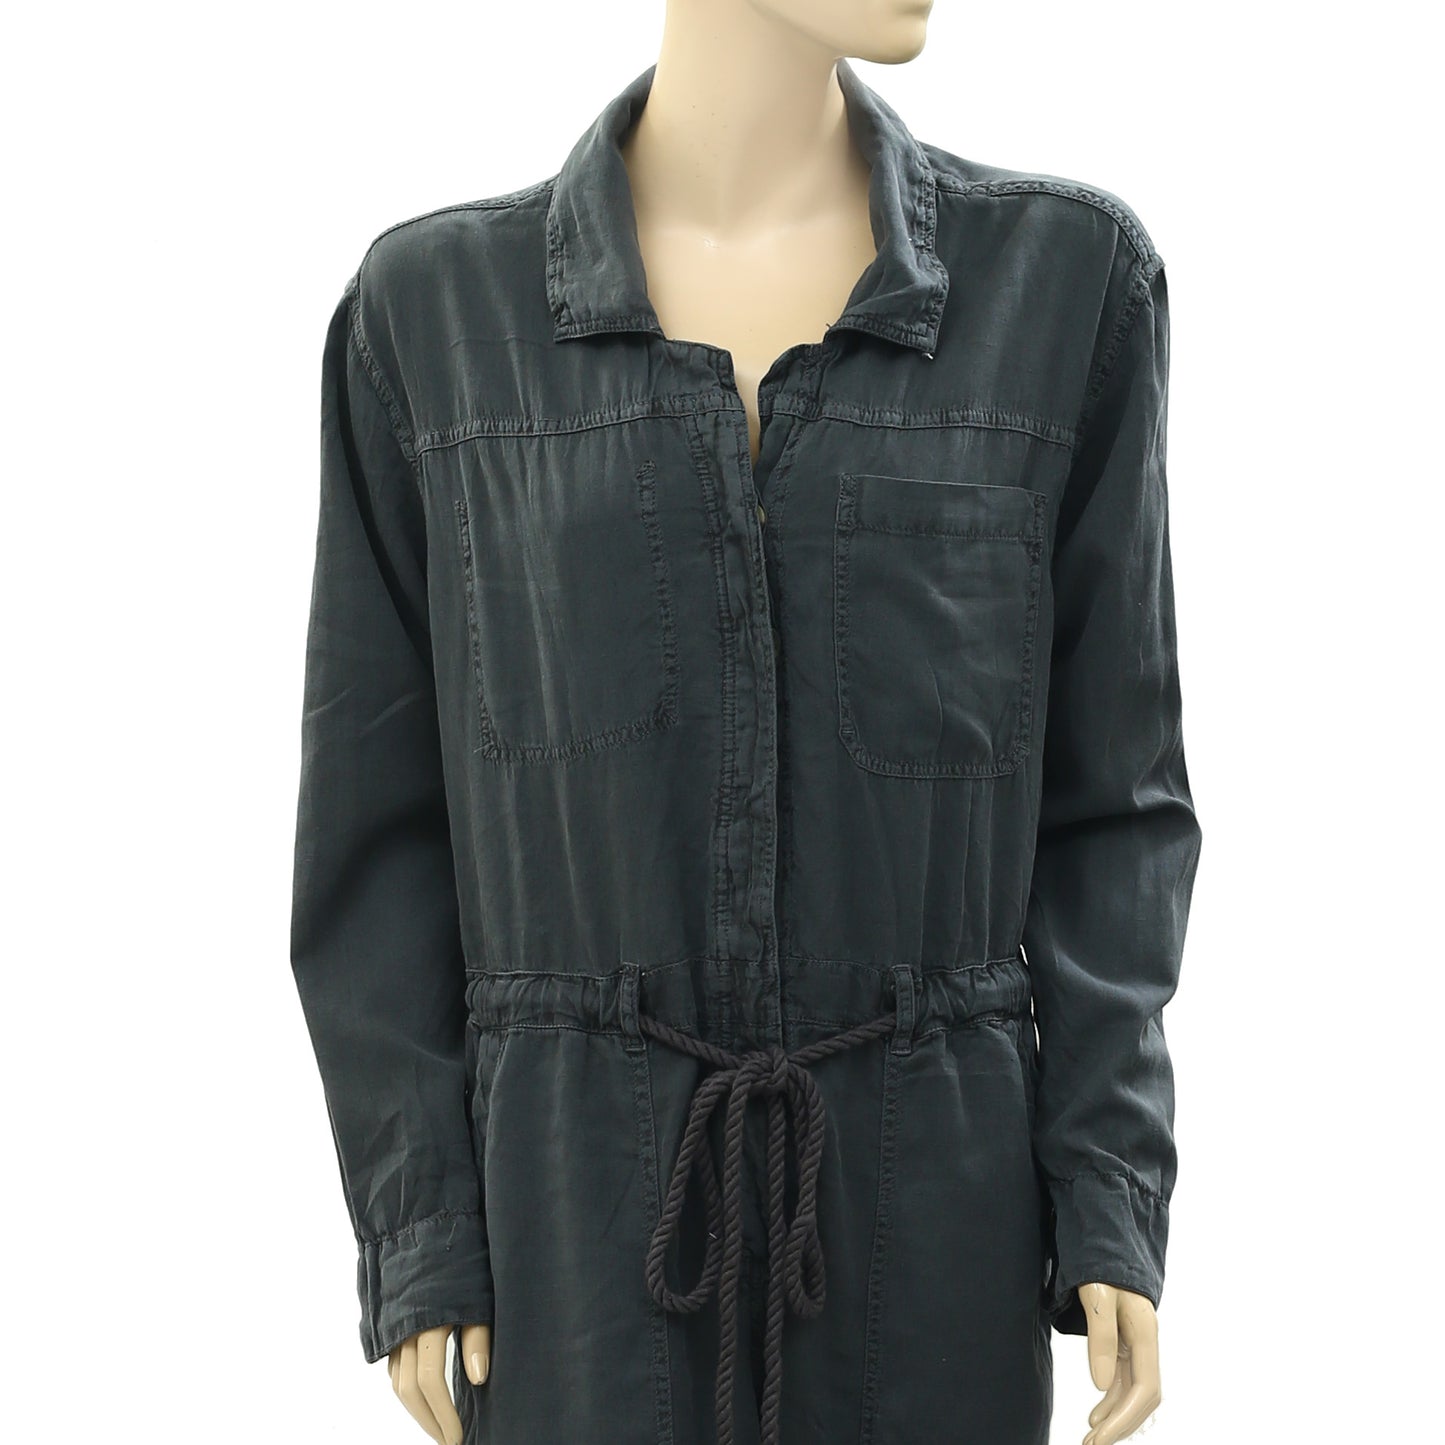 Free People Quinn Coveralls Jumpsuit